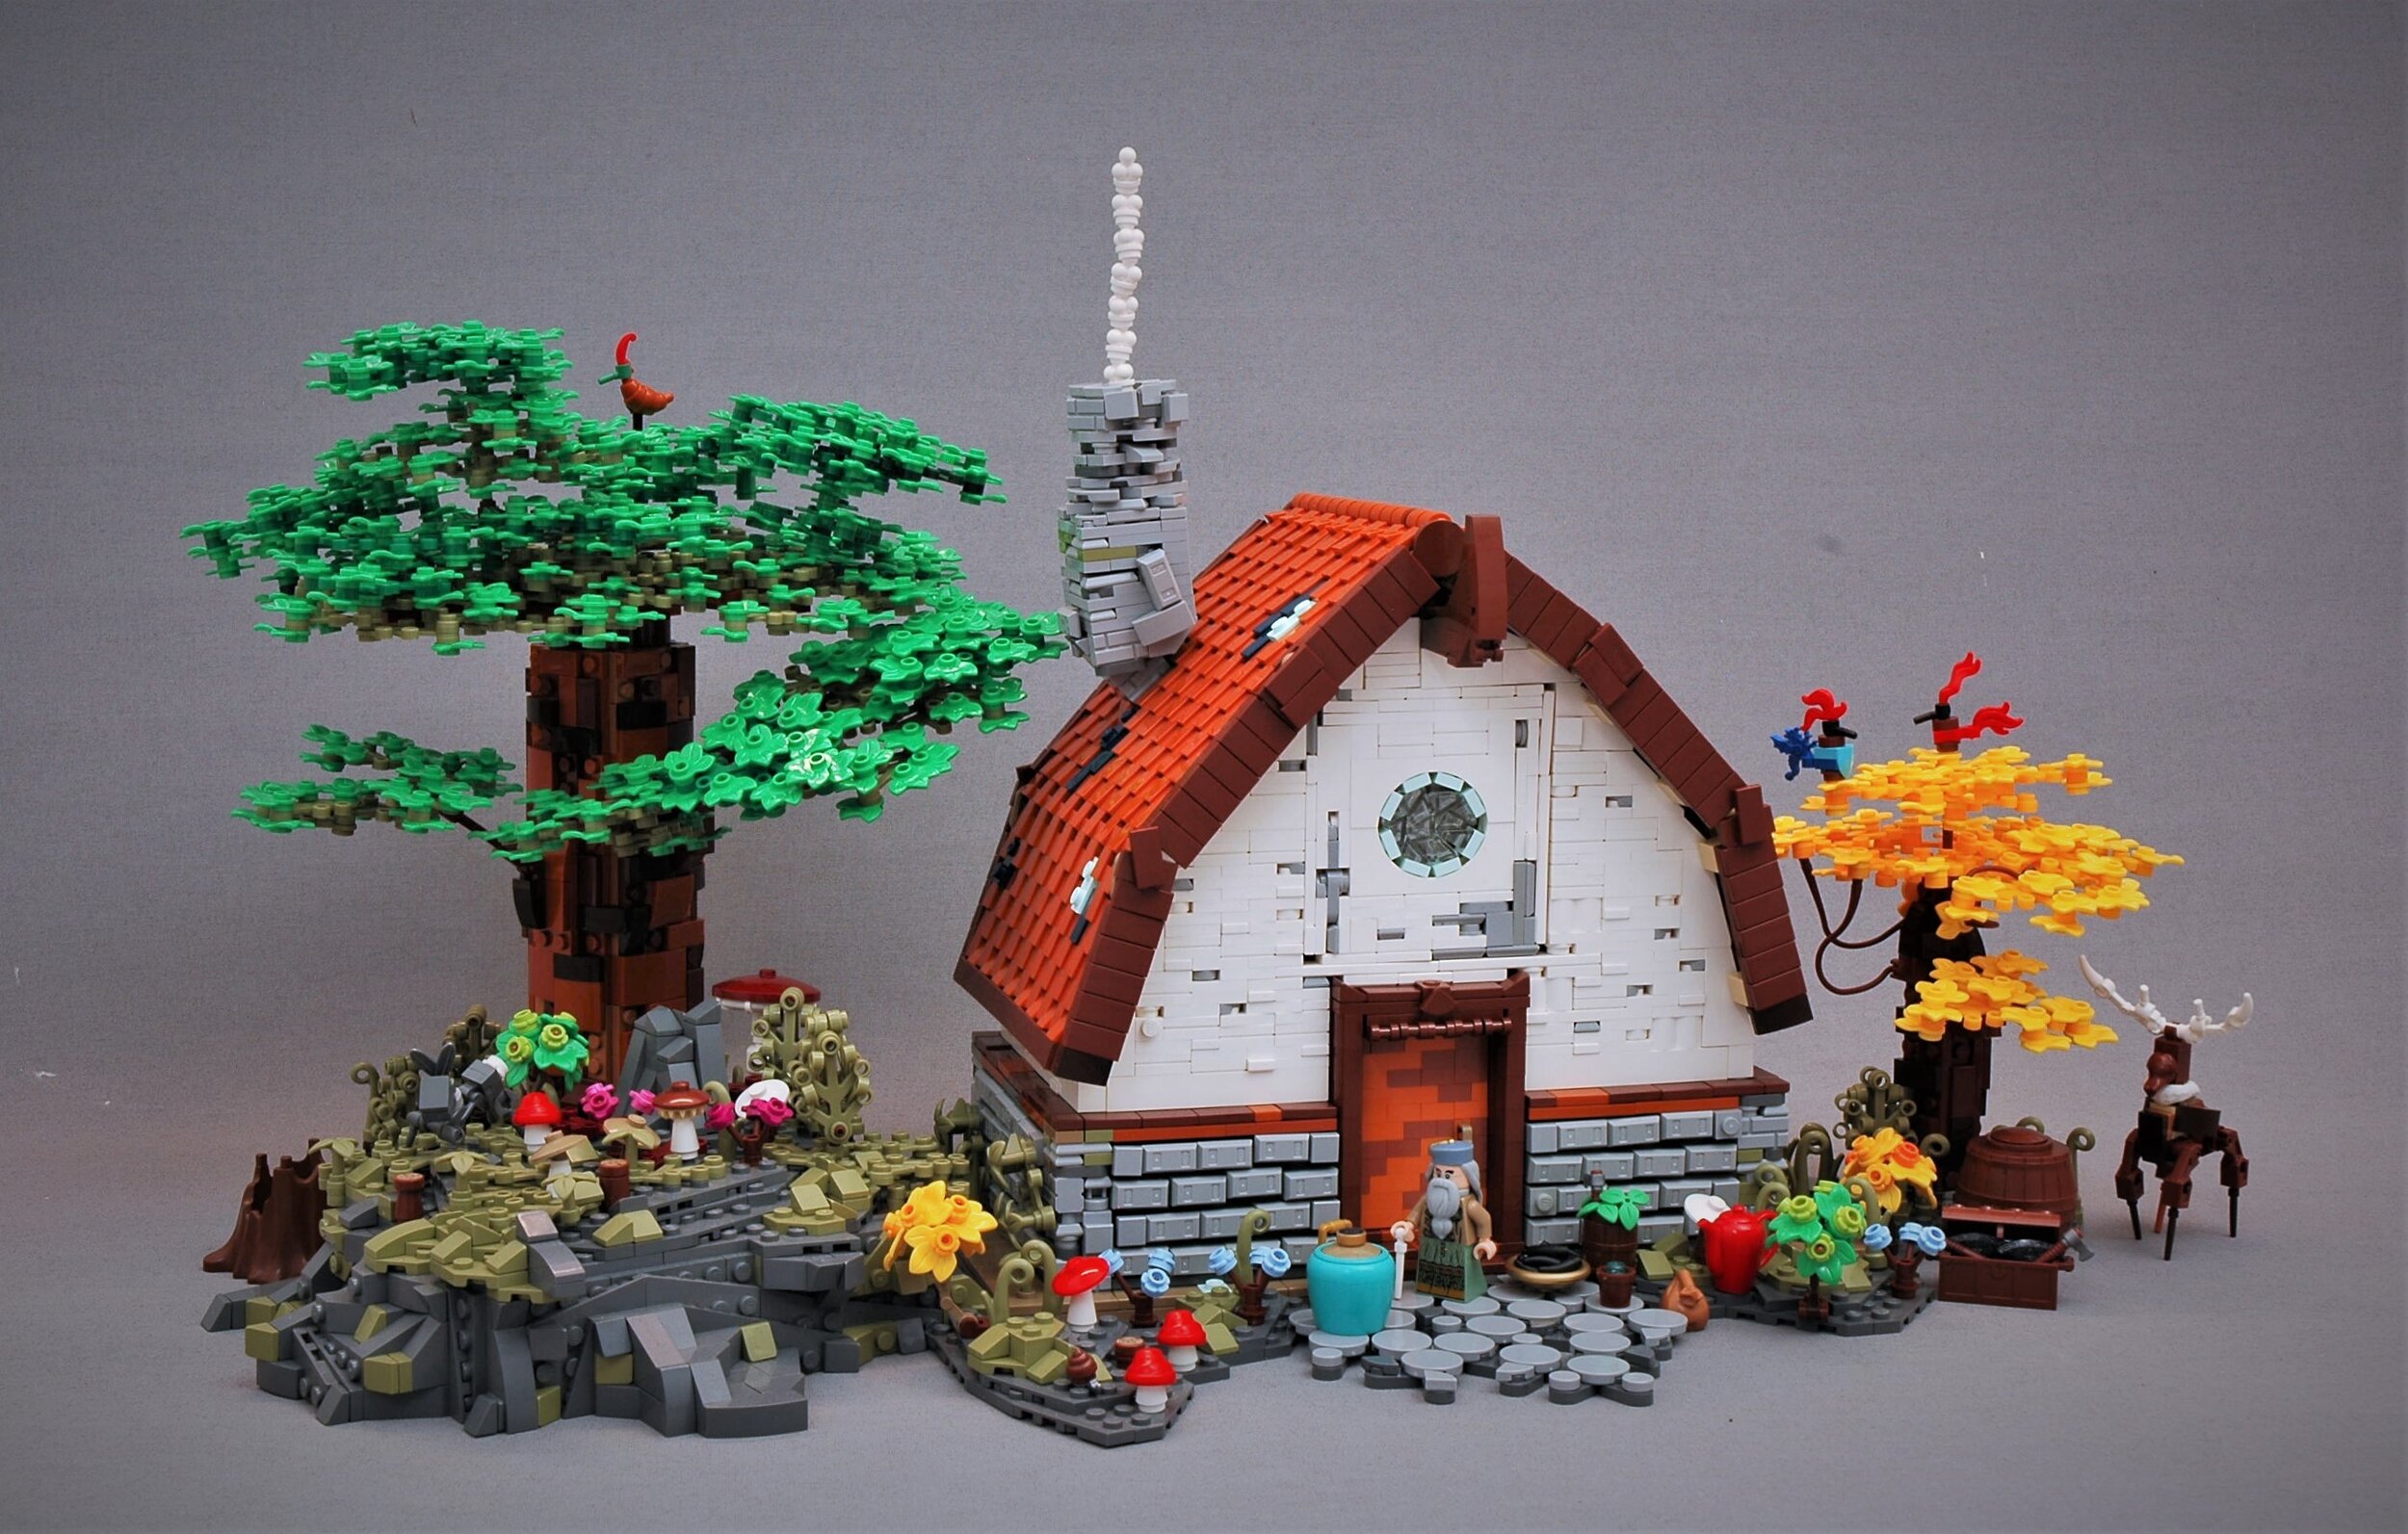 How to Build a LEGO Cottage in the Most Illegal Way Possible - BrickNerd -  All things LEGO and the LEGO fan community